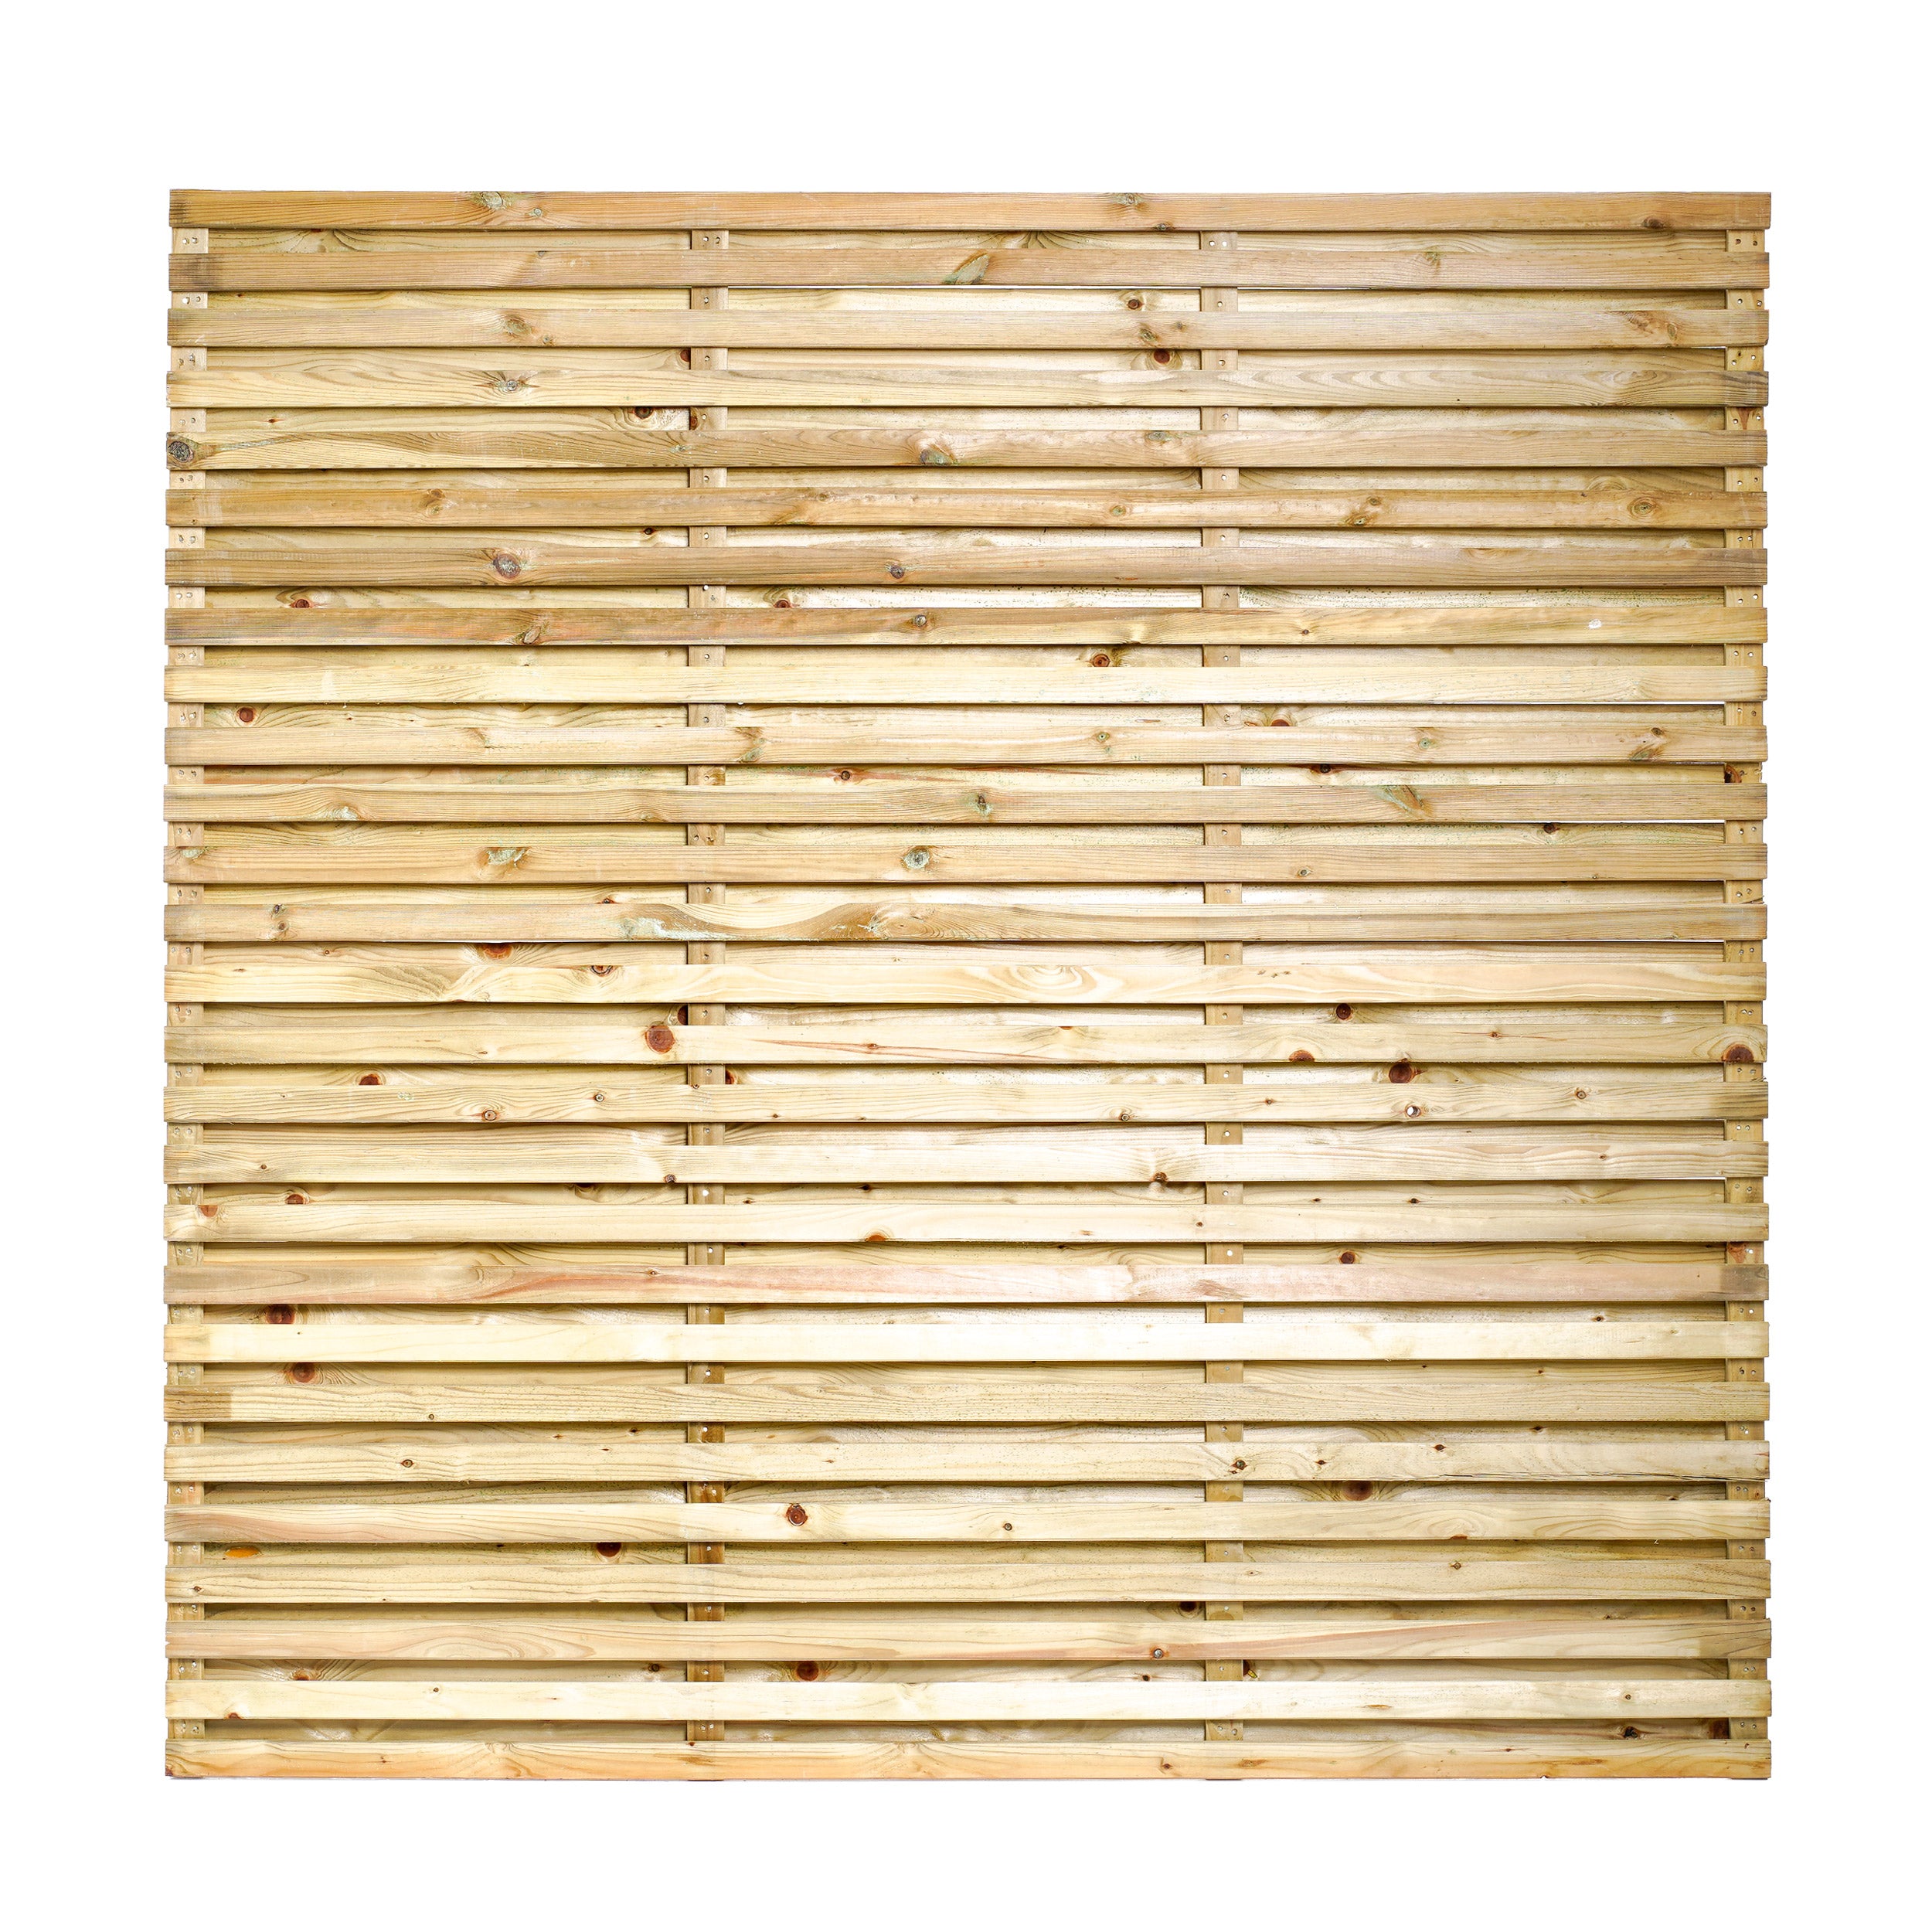 6ft x 6ft Double Slatted Fence Panel - Pressure Treated Green